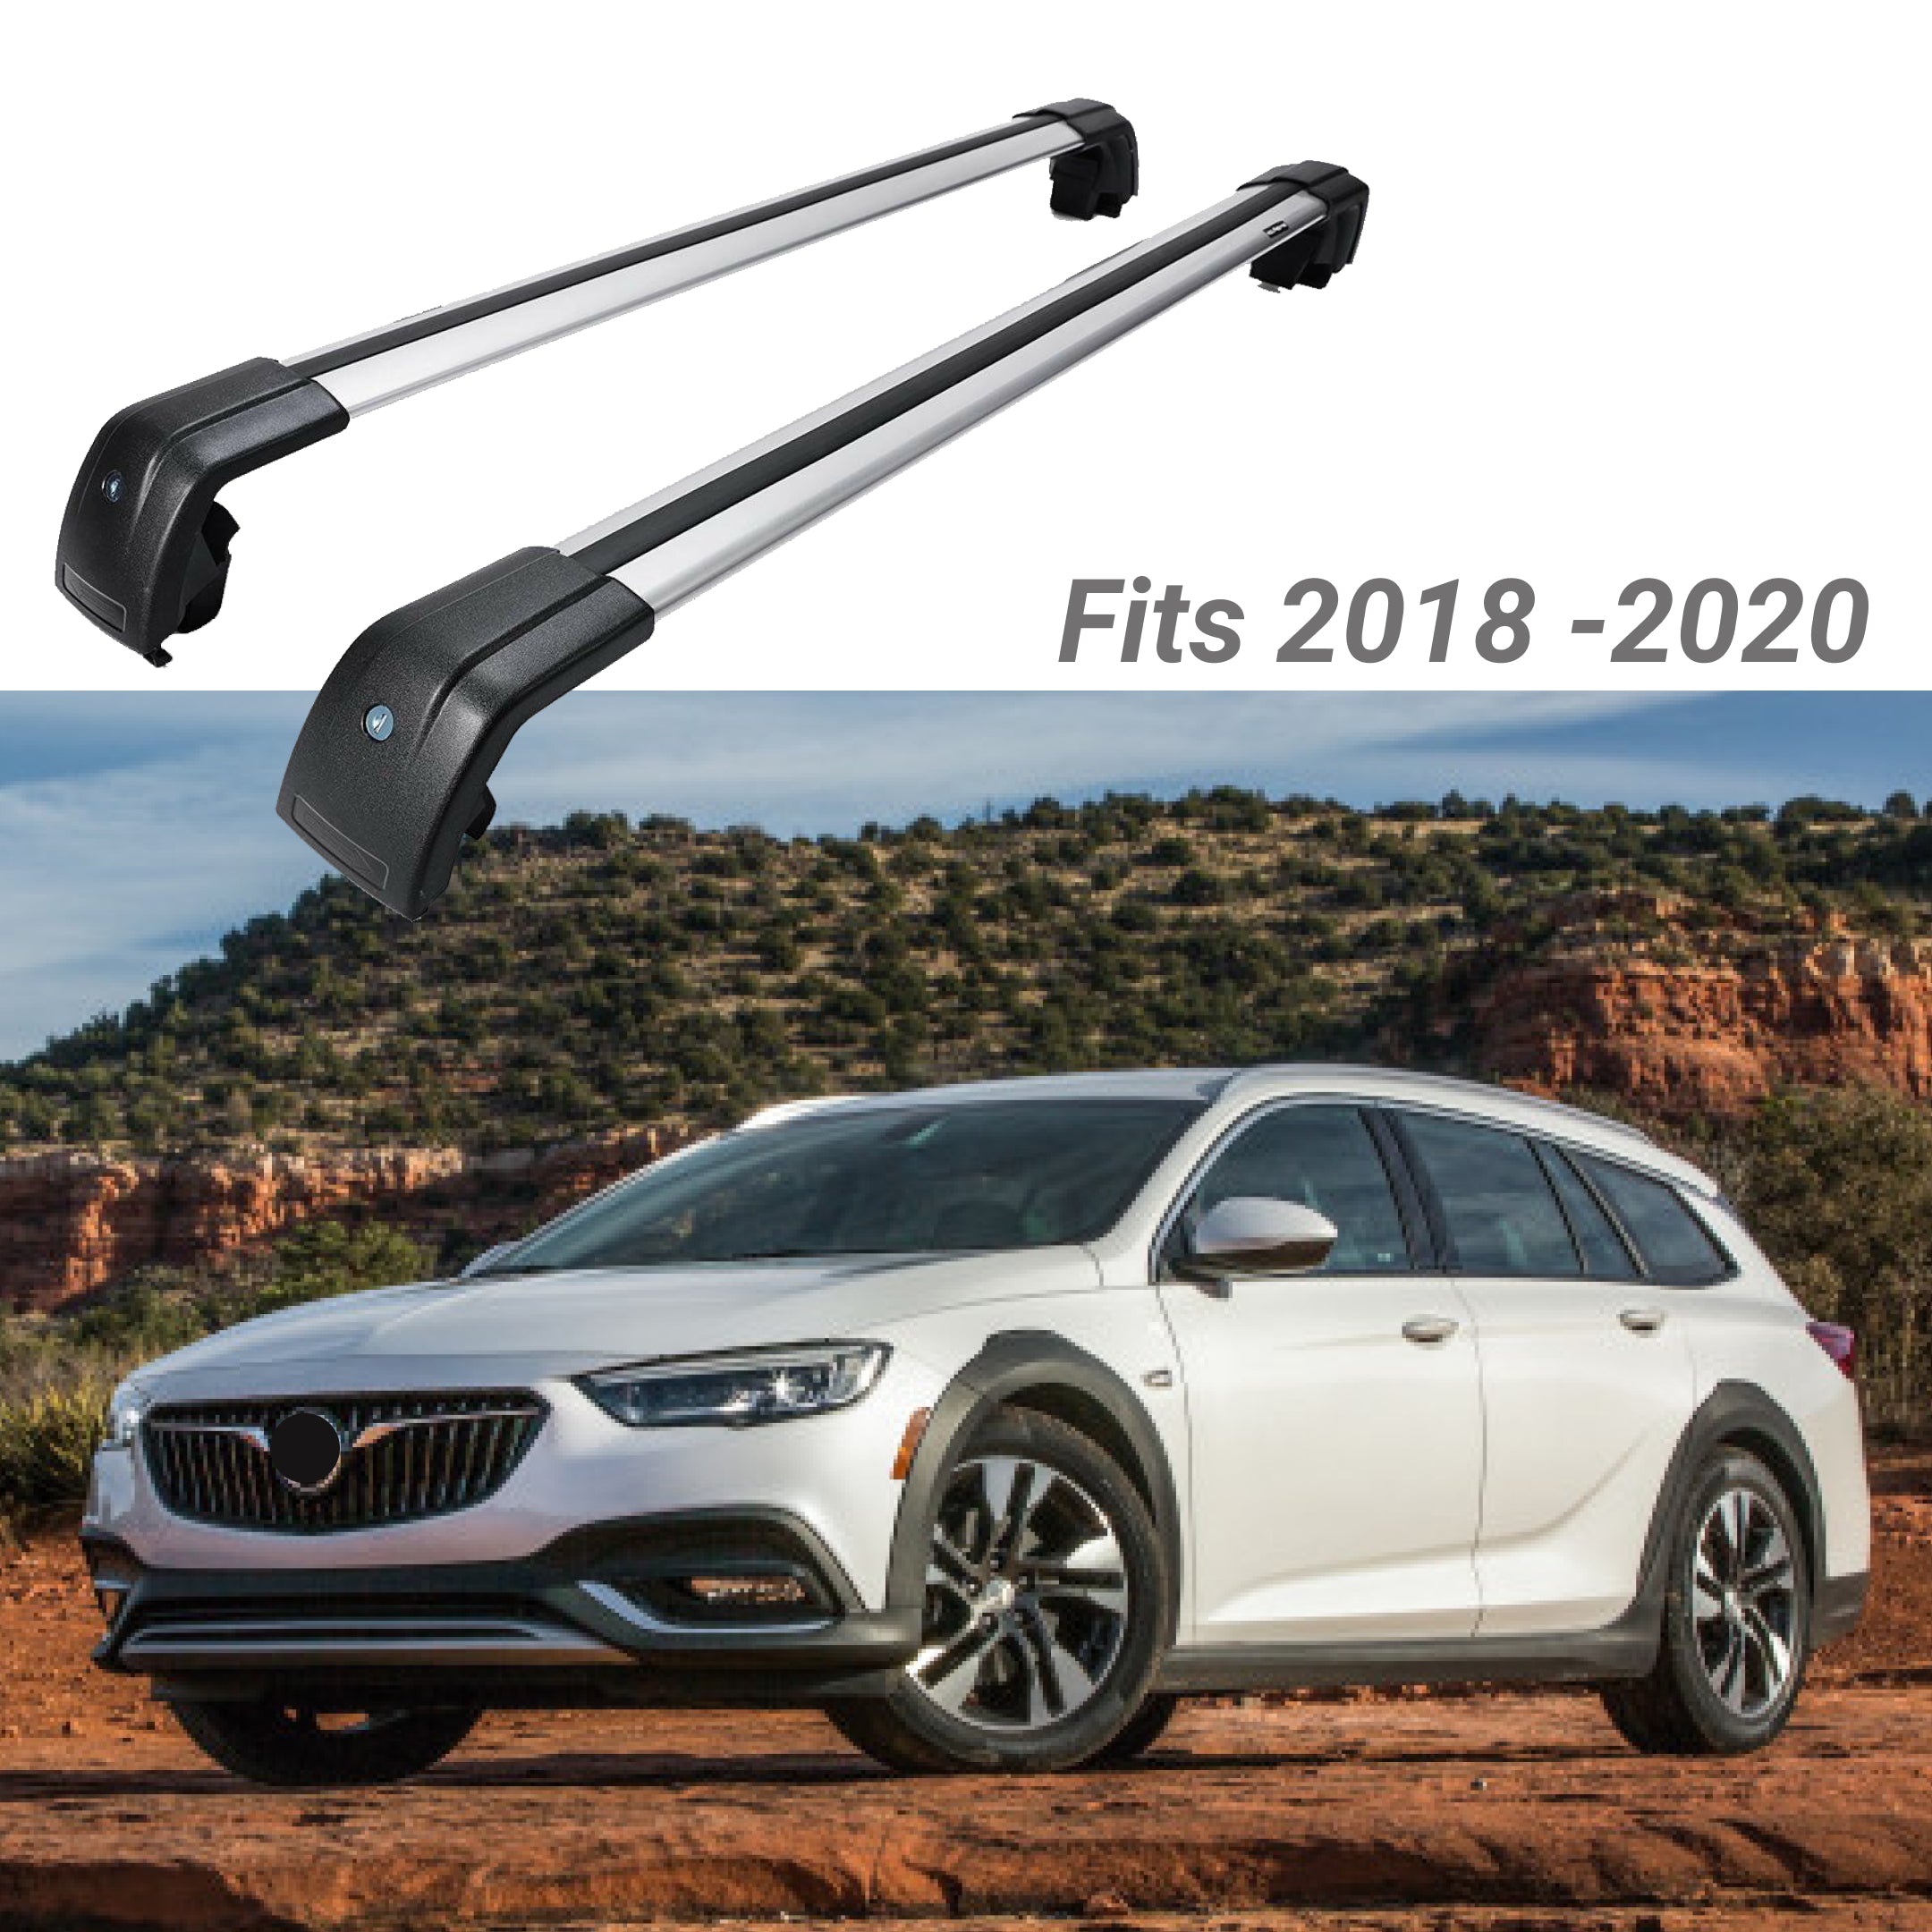 Fit 2018-2020 Regal TourX SUV Top Roof Rack Cross Bar Baggage Luggage Carrier Bar